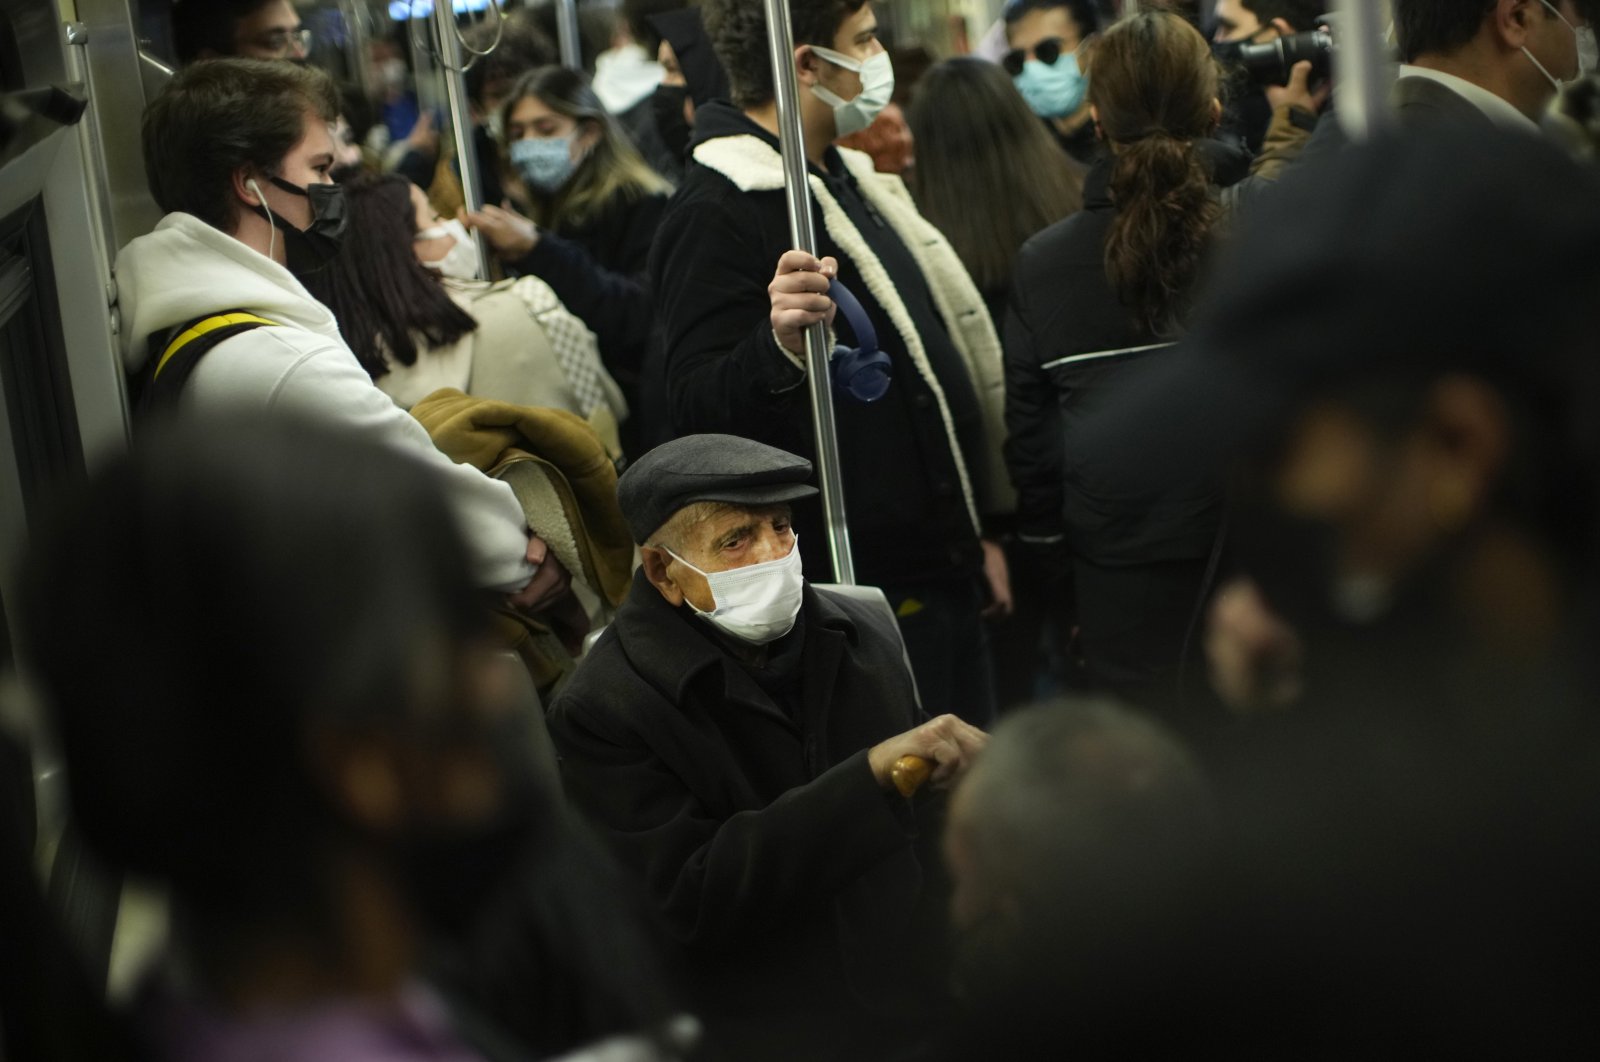 People, all wearing masks to prevent the spread of COVID-19, take a ride on a metro train in Istanbul, Turkey, Dec. 2, 2021. (AP Photo)